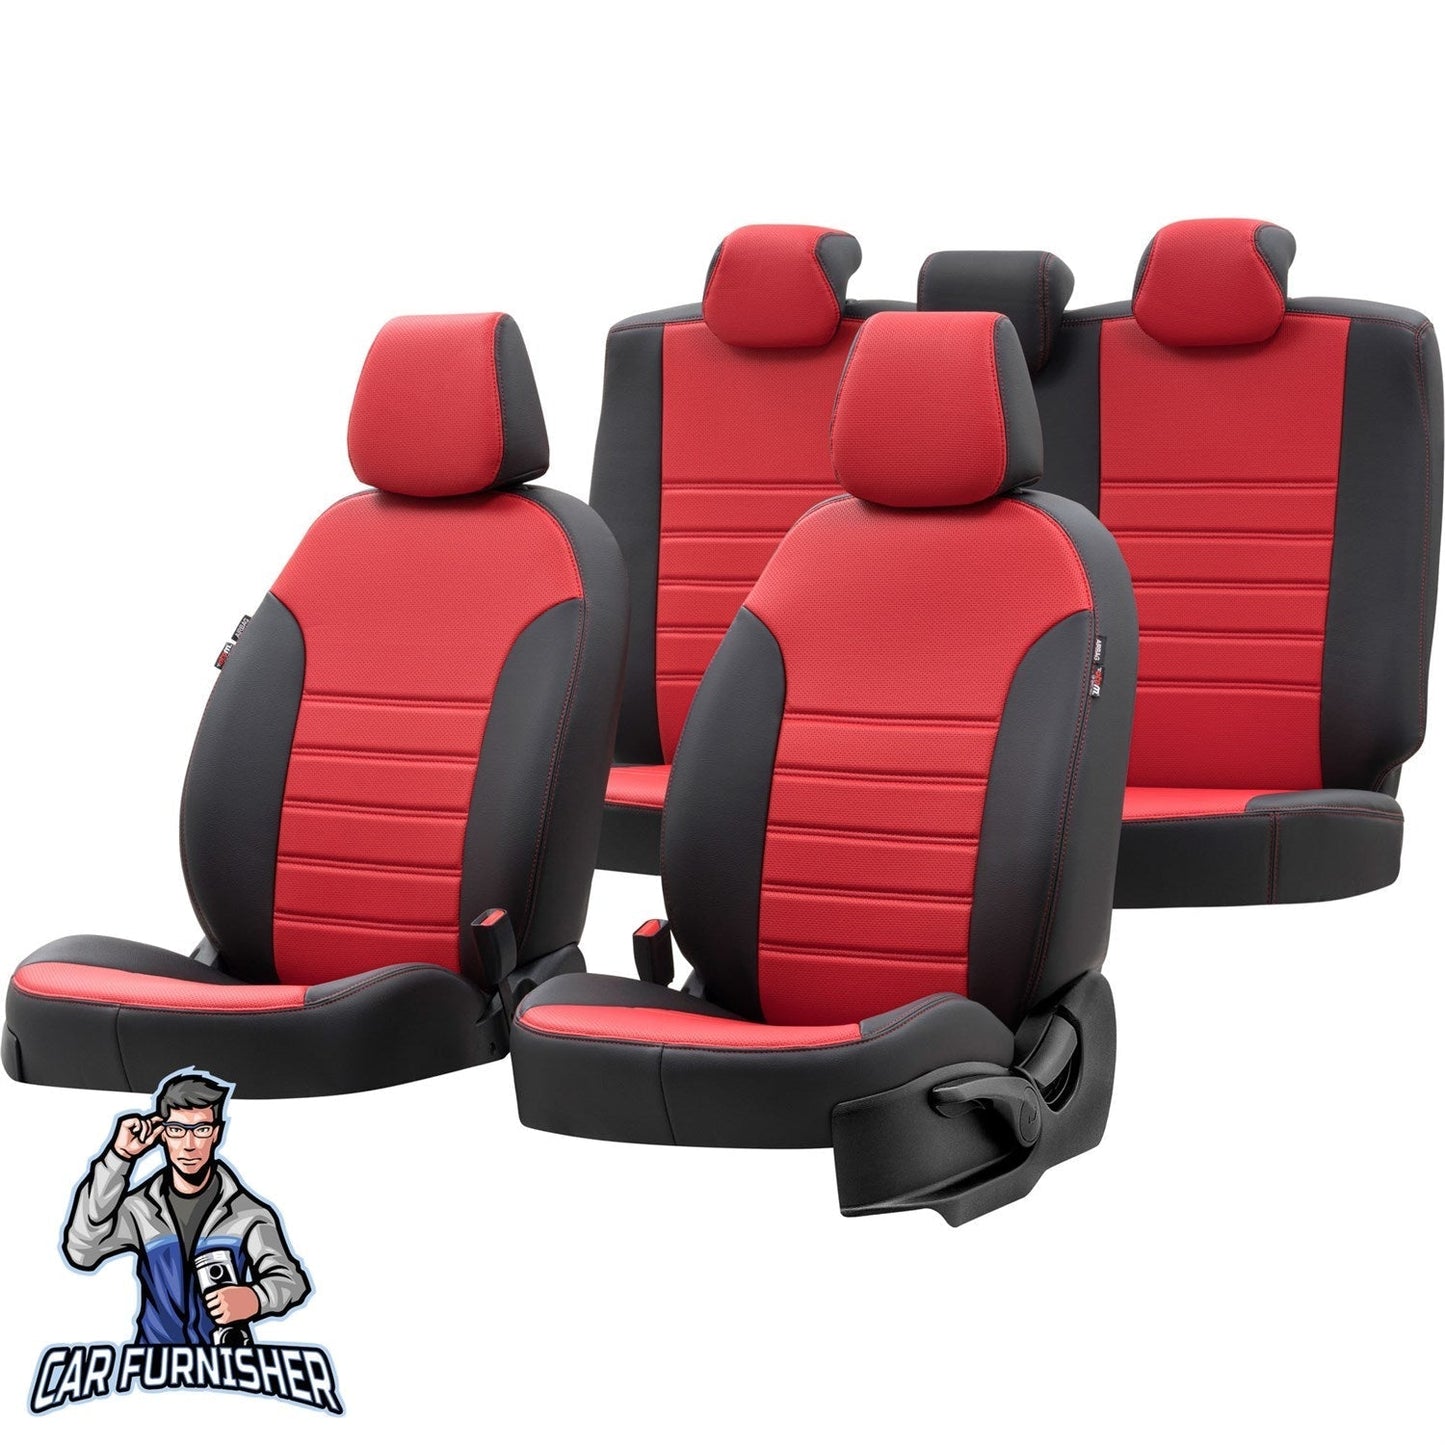 Renault Twingo Seat Cover New York Leather Design Red Leather